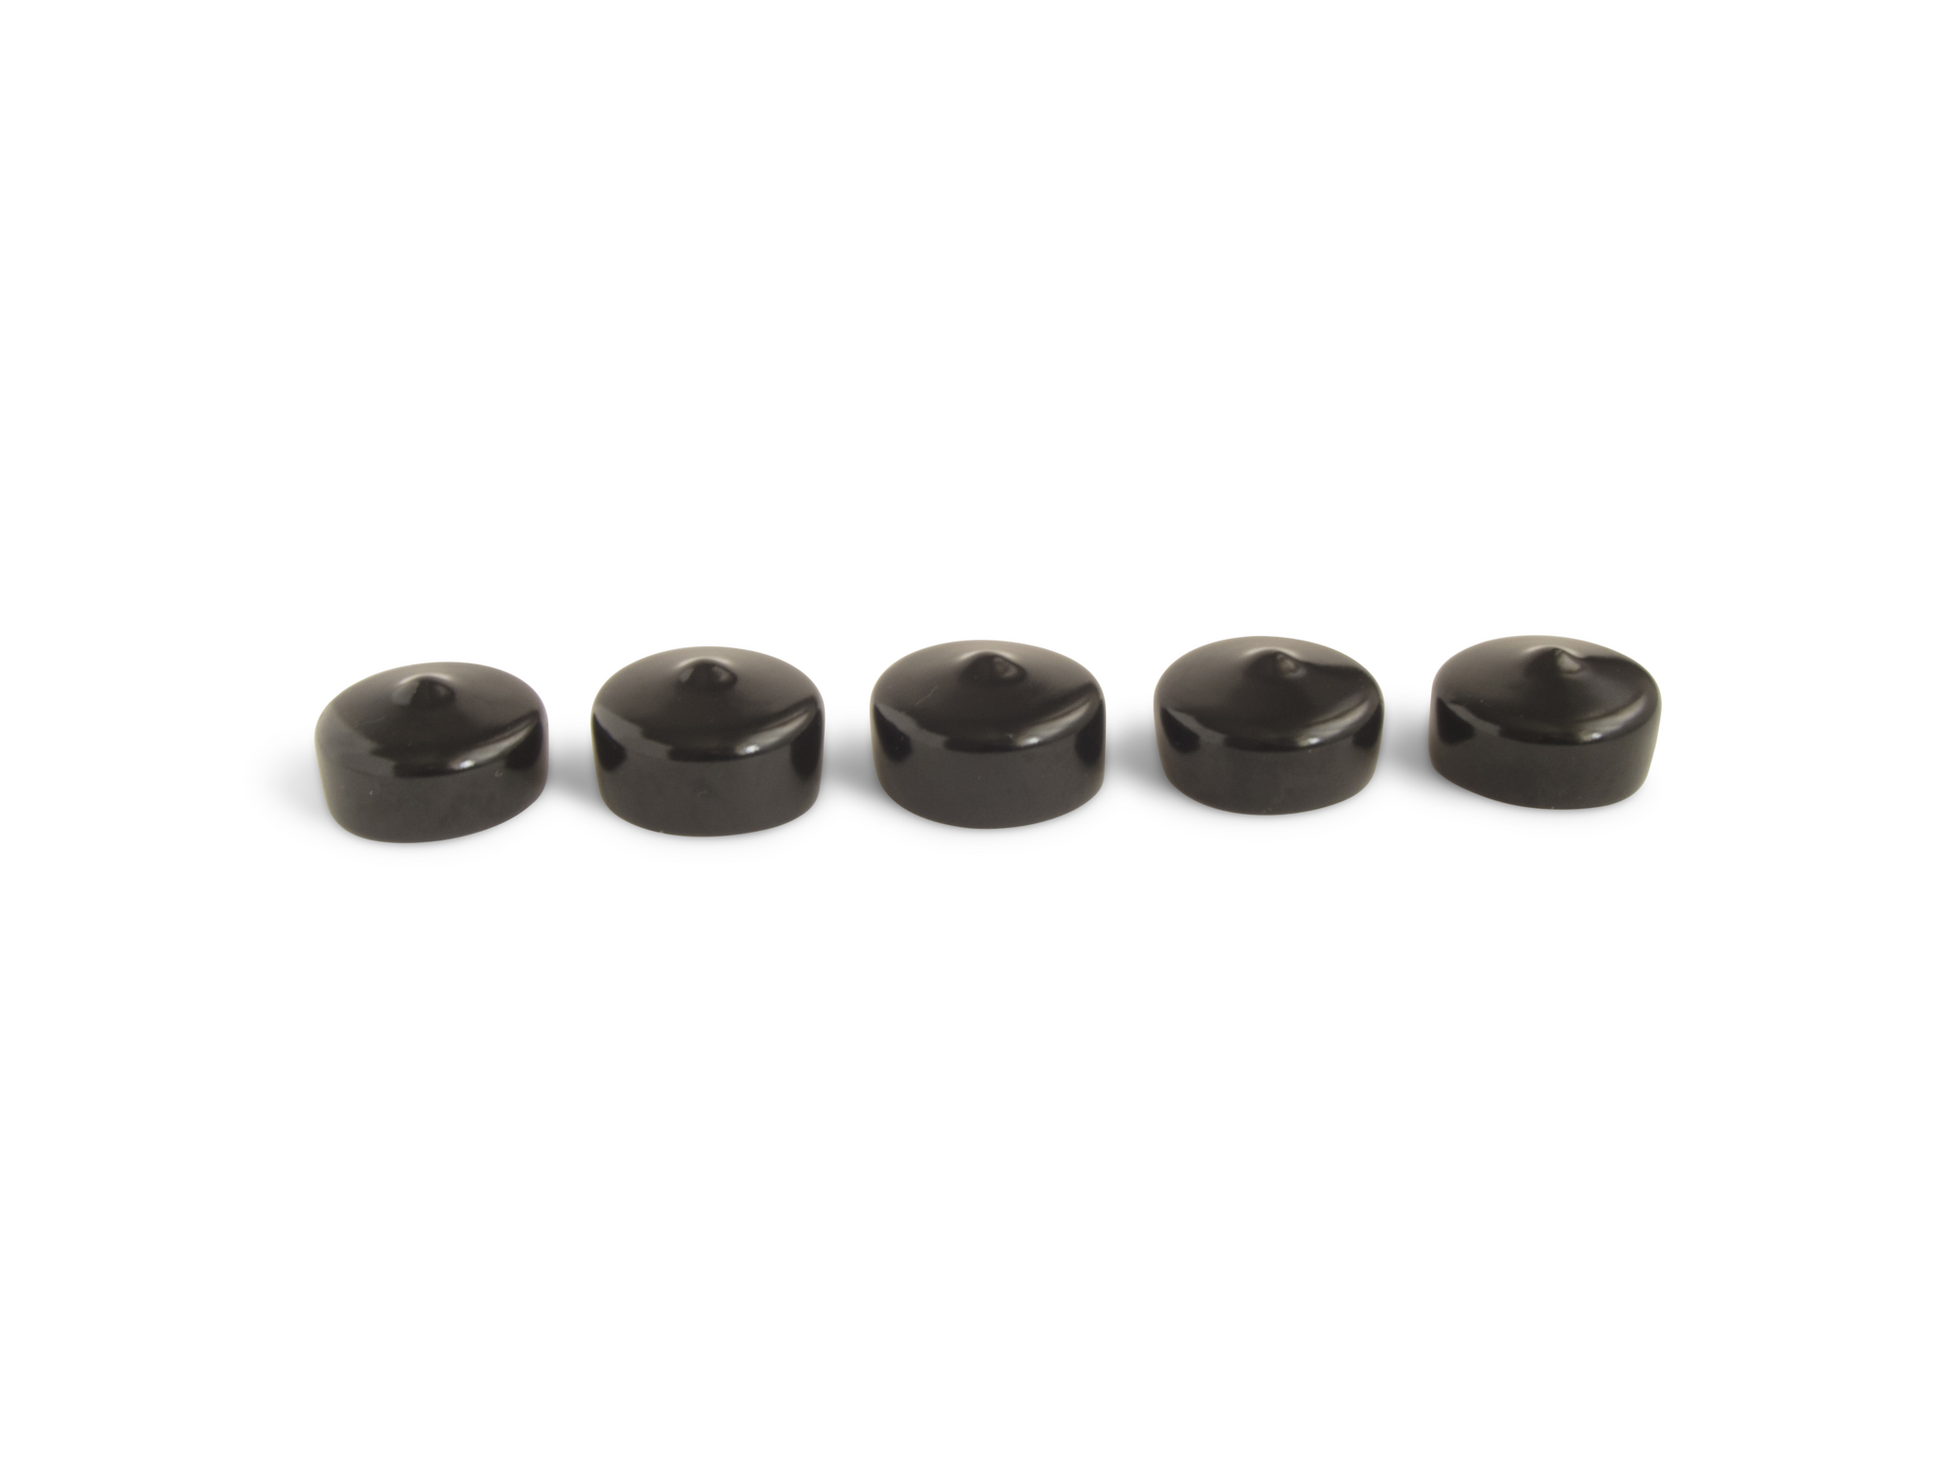 Ejection Charge Canister Caps - Black Cat Rocketry